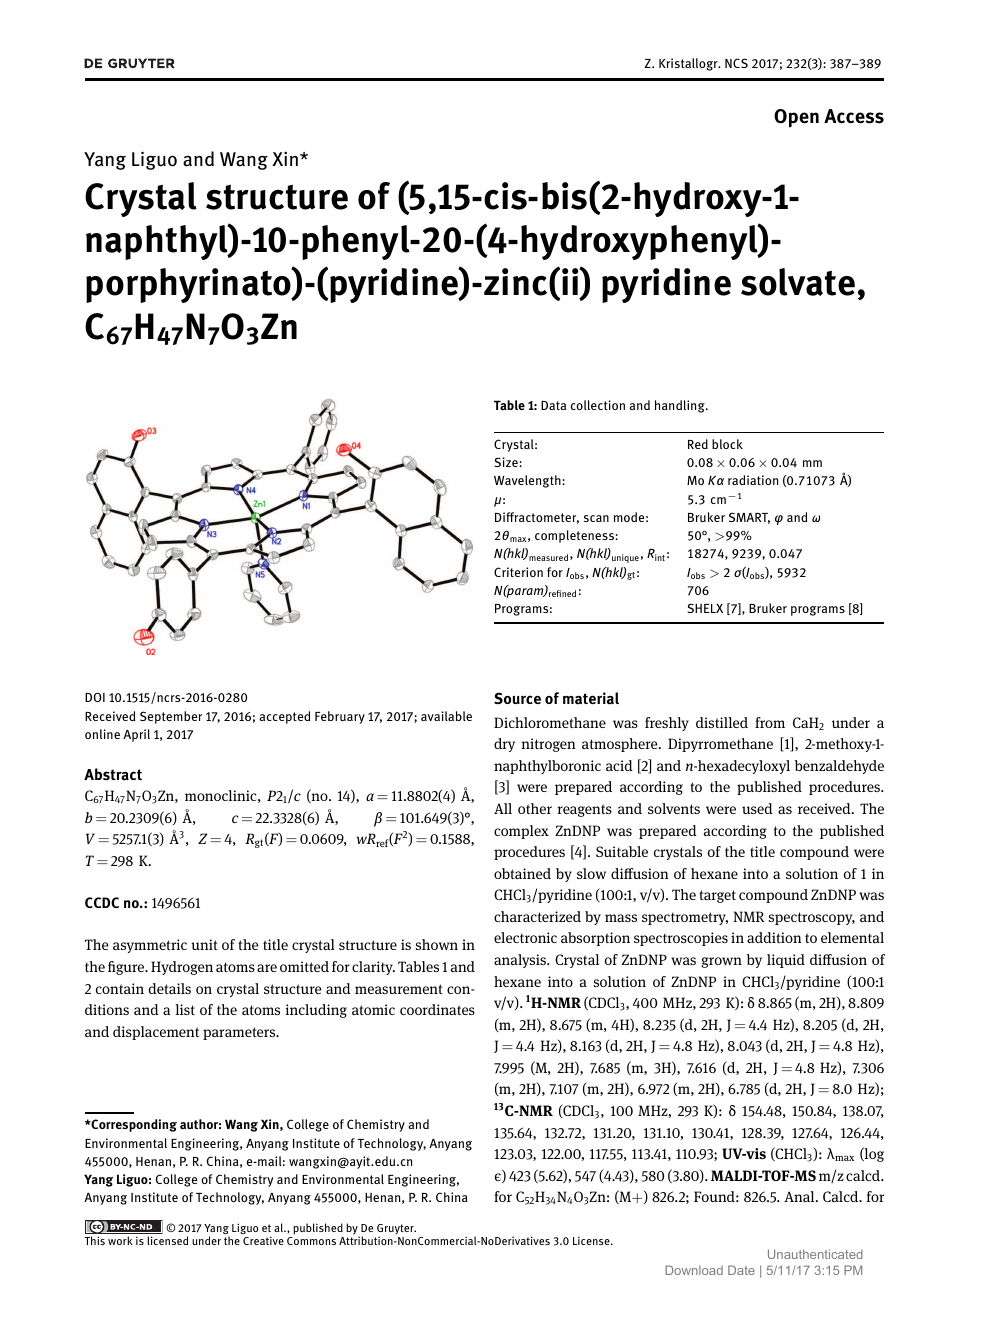 Crystal Structure Of 5 15 Cis Bis 2 Hydroxy 1 Naphthyl 10 Phenyl 4 Hydroxyphenyl Porphyrinato Pyridine Zinc Ii Pyridine Solvate C67h47n7o3zn Topic Of Research Paper In Chemical Sciences Download Scholarly Article Pdf And Read For Free On